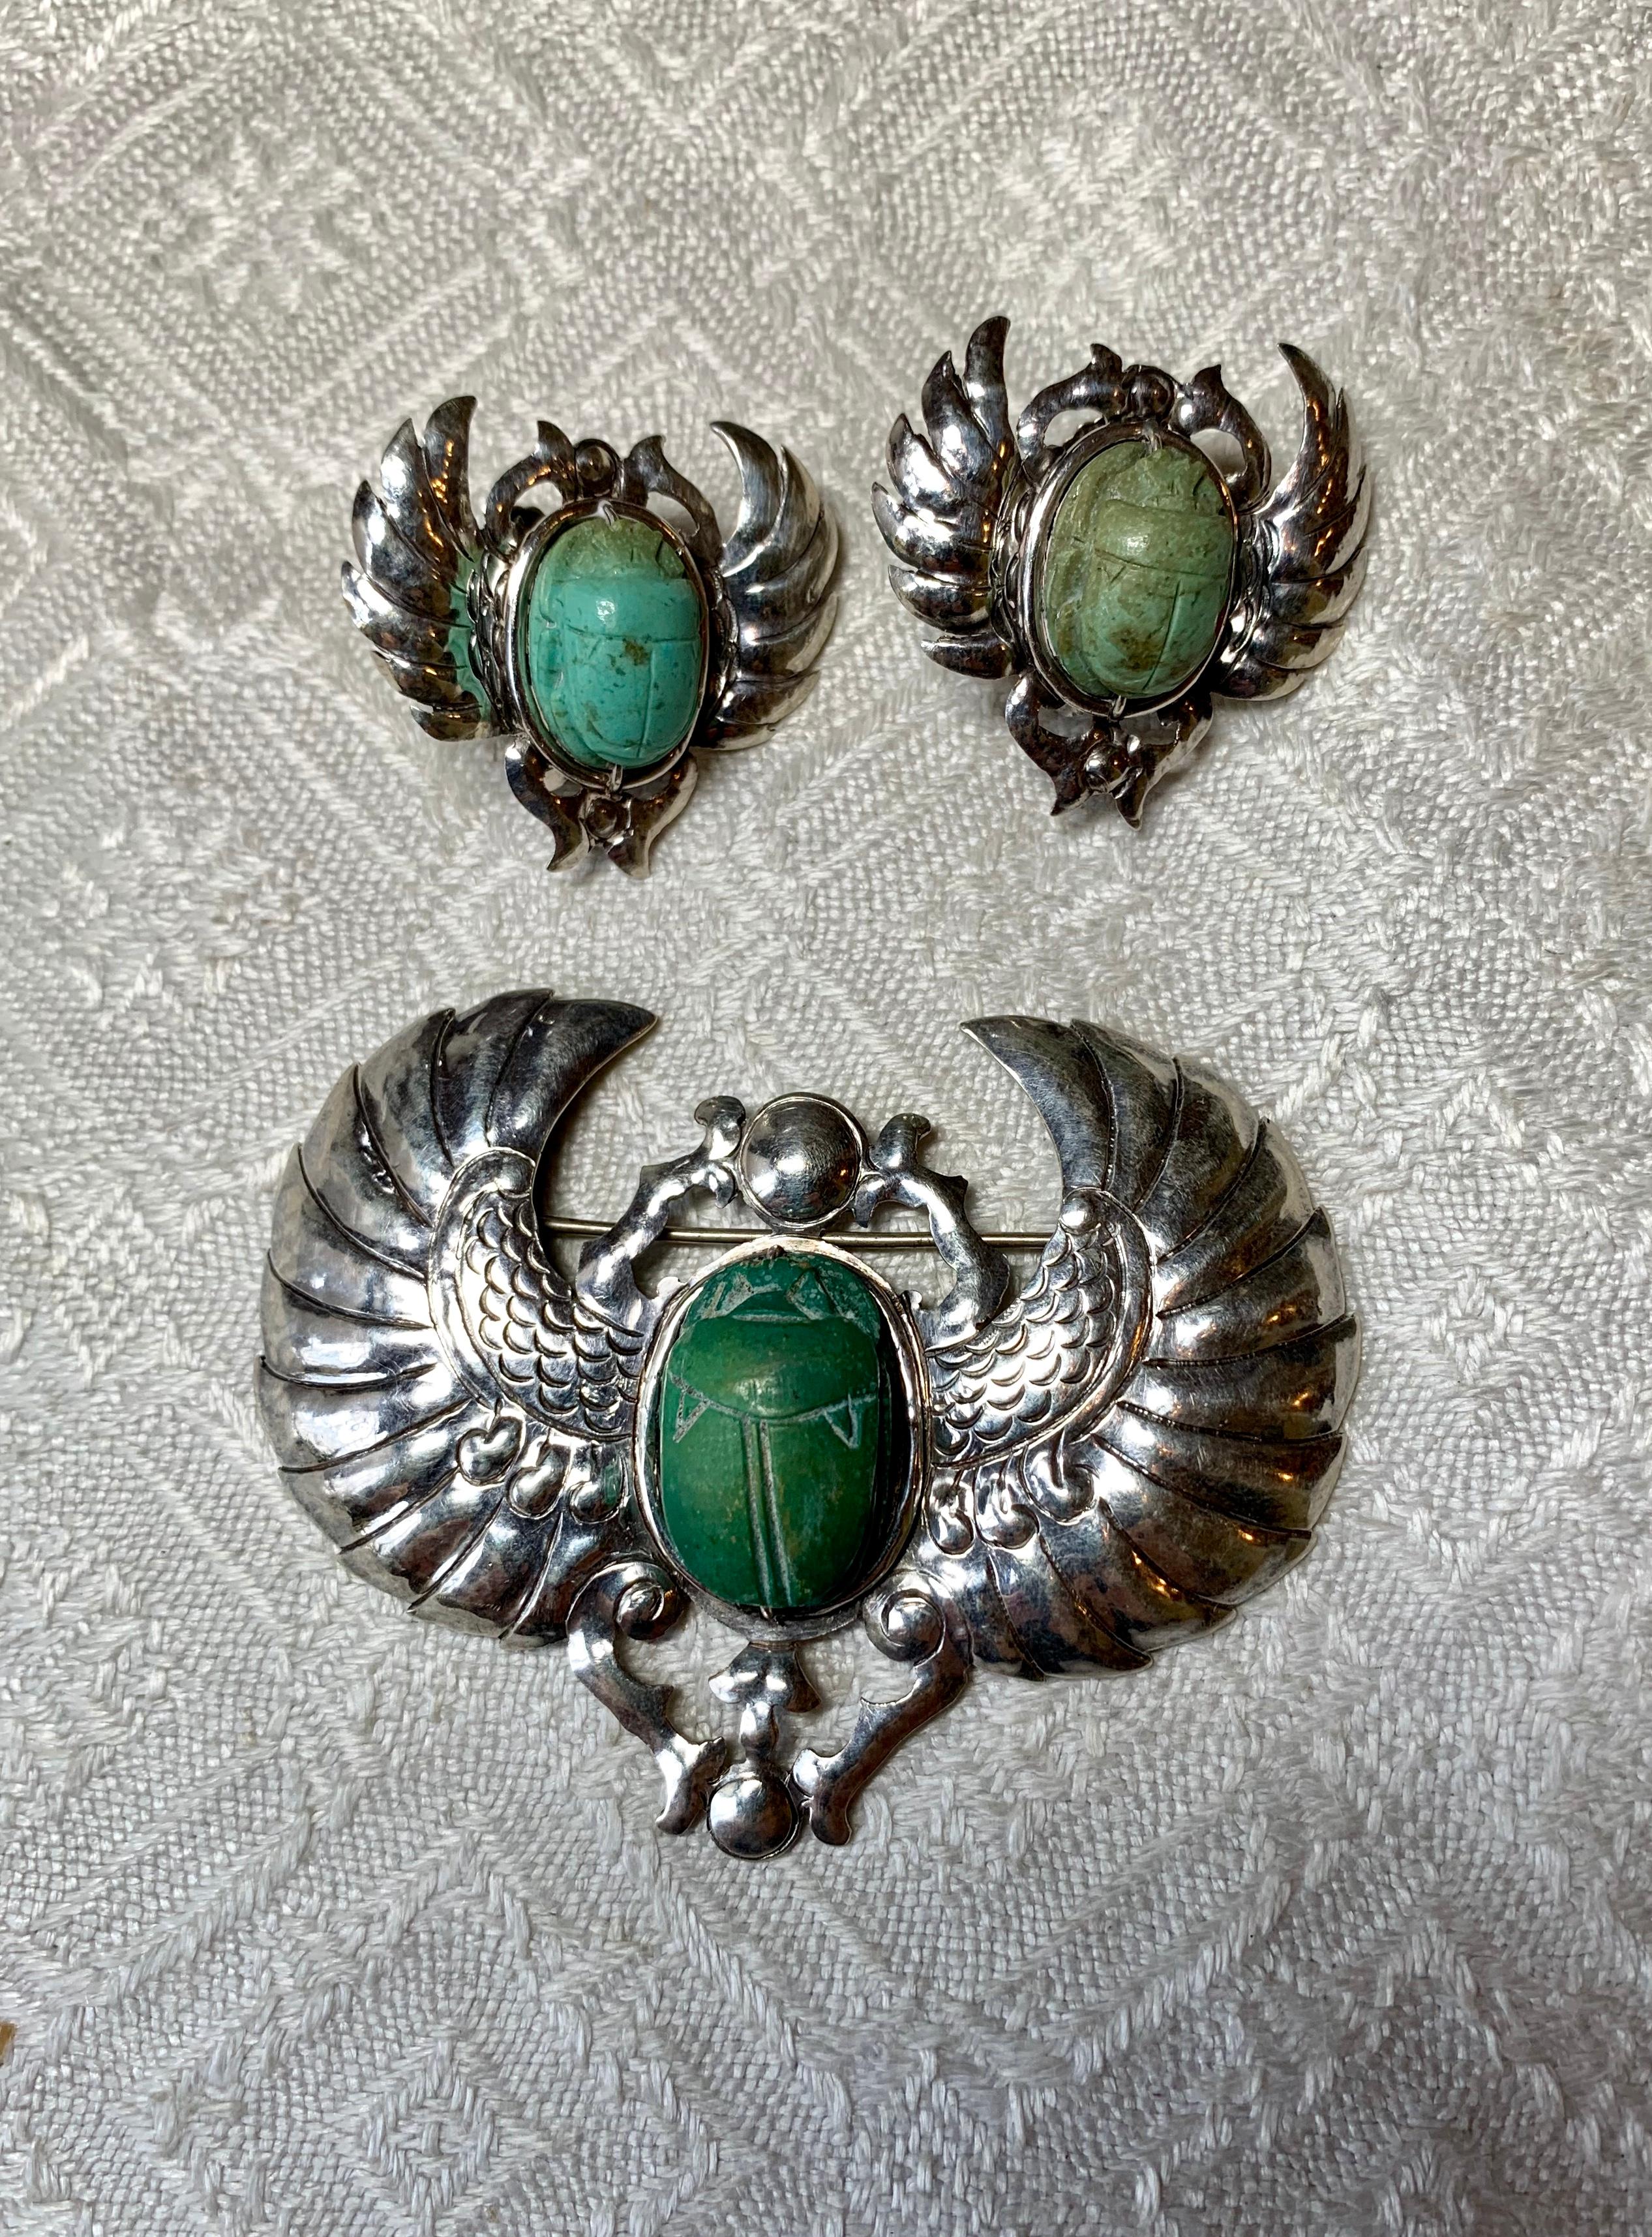 This is a very rare Museum Quality Parure of Scarab Earrings and Brooch.  The jewels are Egyptian Revival masterpieces by the acclaimed artist Doris Cliff (1885-1968) of Chicago.   The earrings and brooch are hand wrought in Sterling Silver with